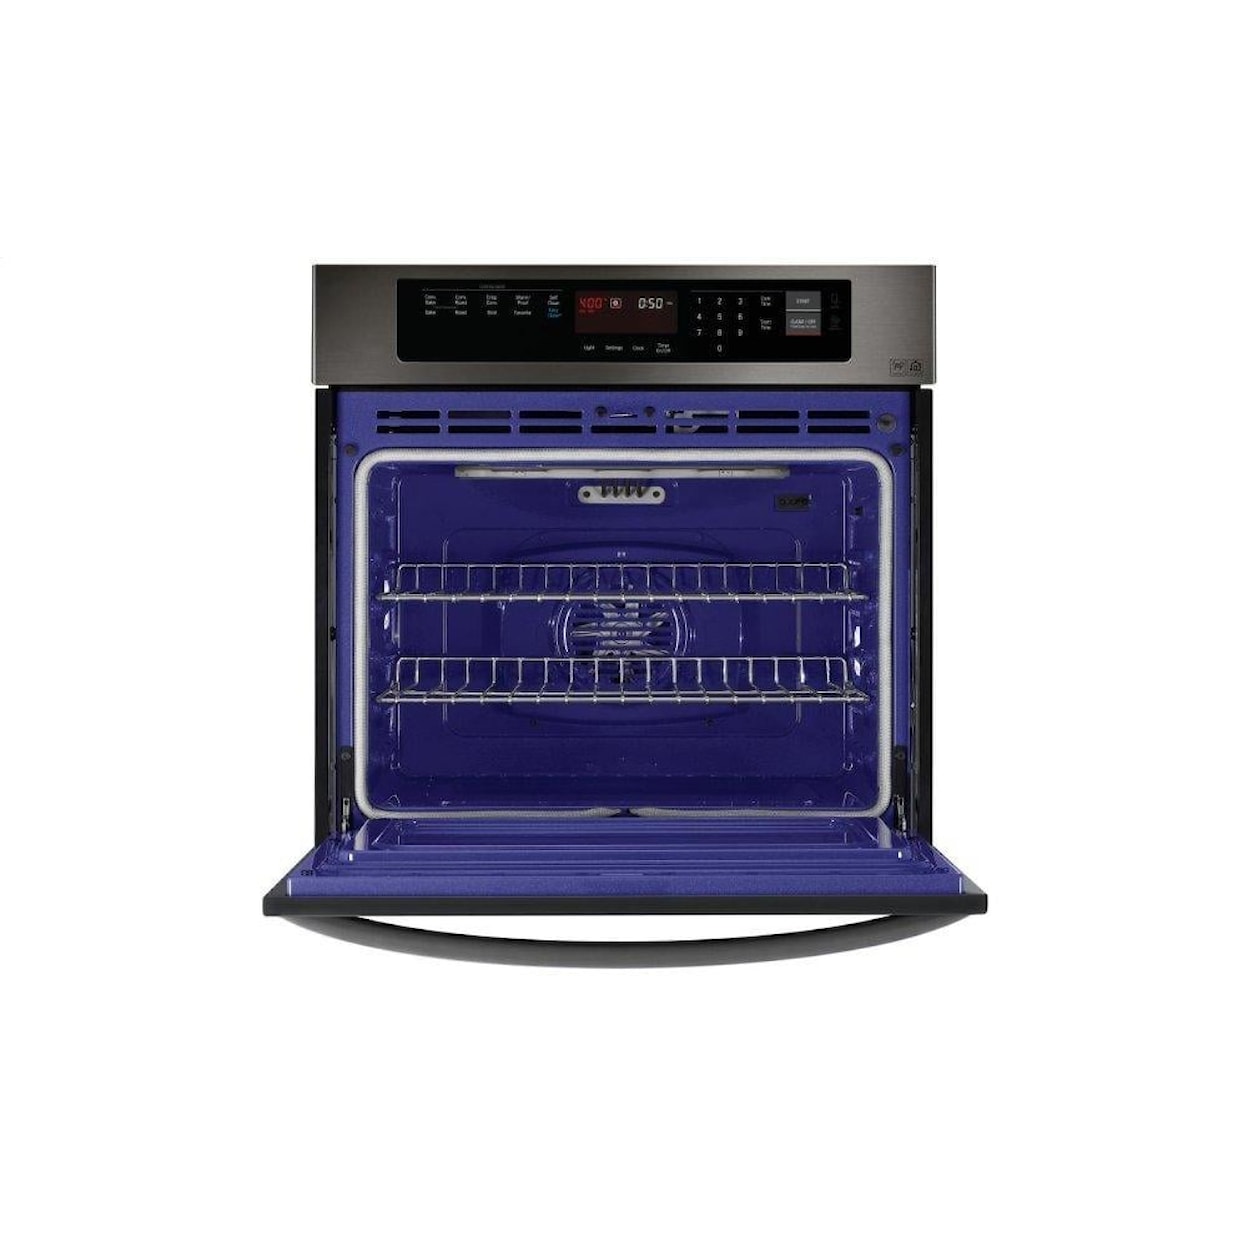 LG Appliances Electric Ranges Single Wall Electric Oven